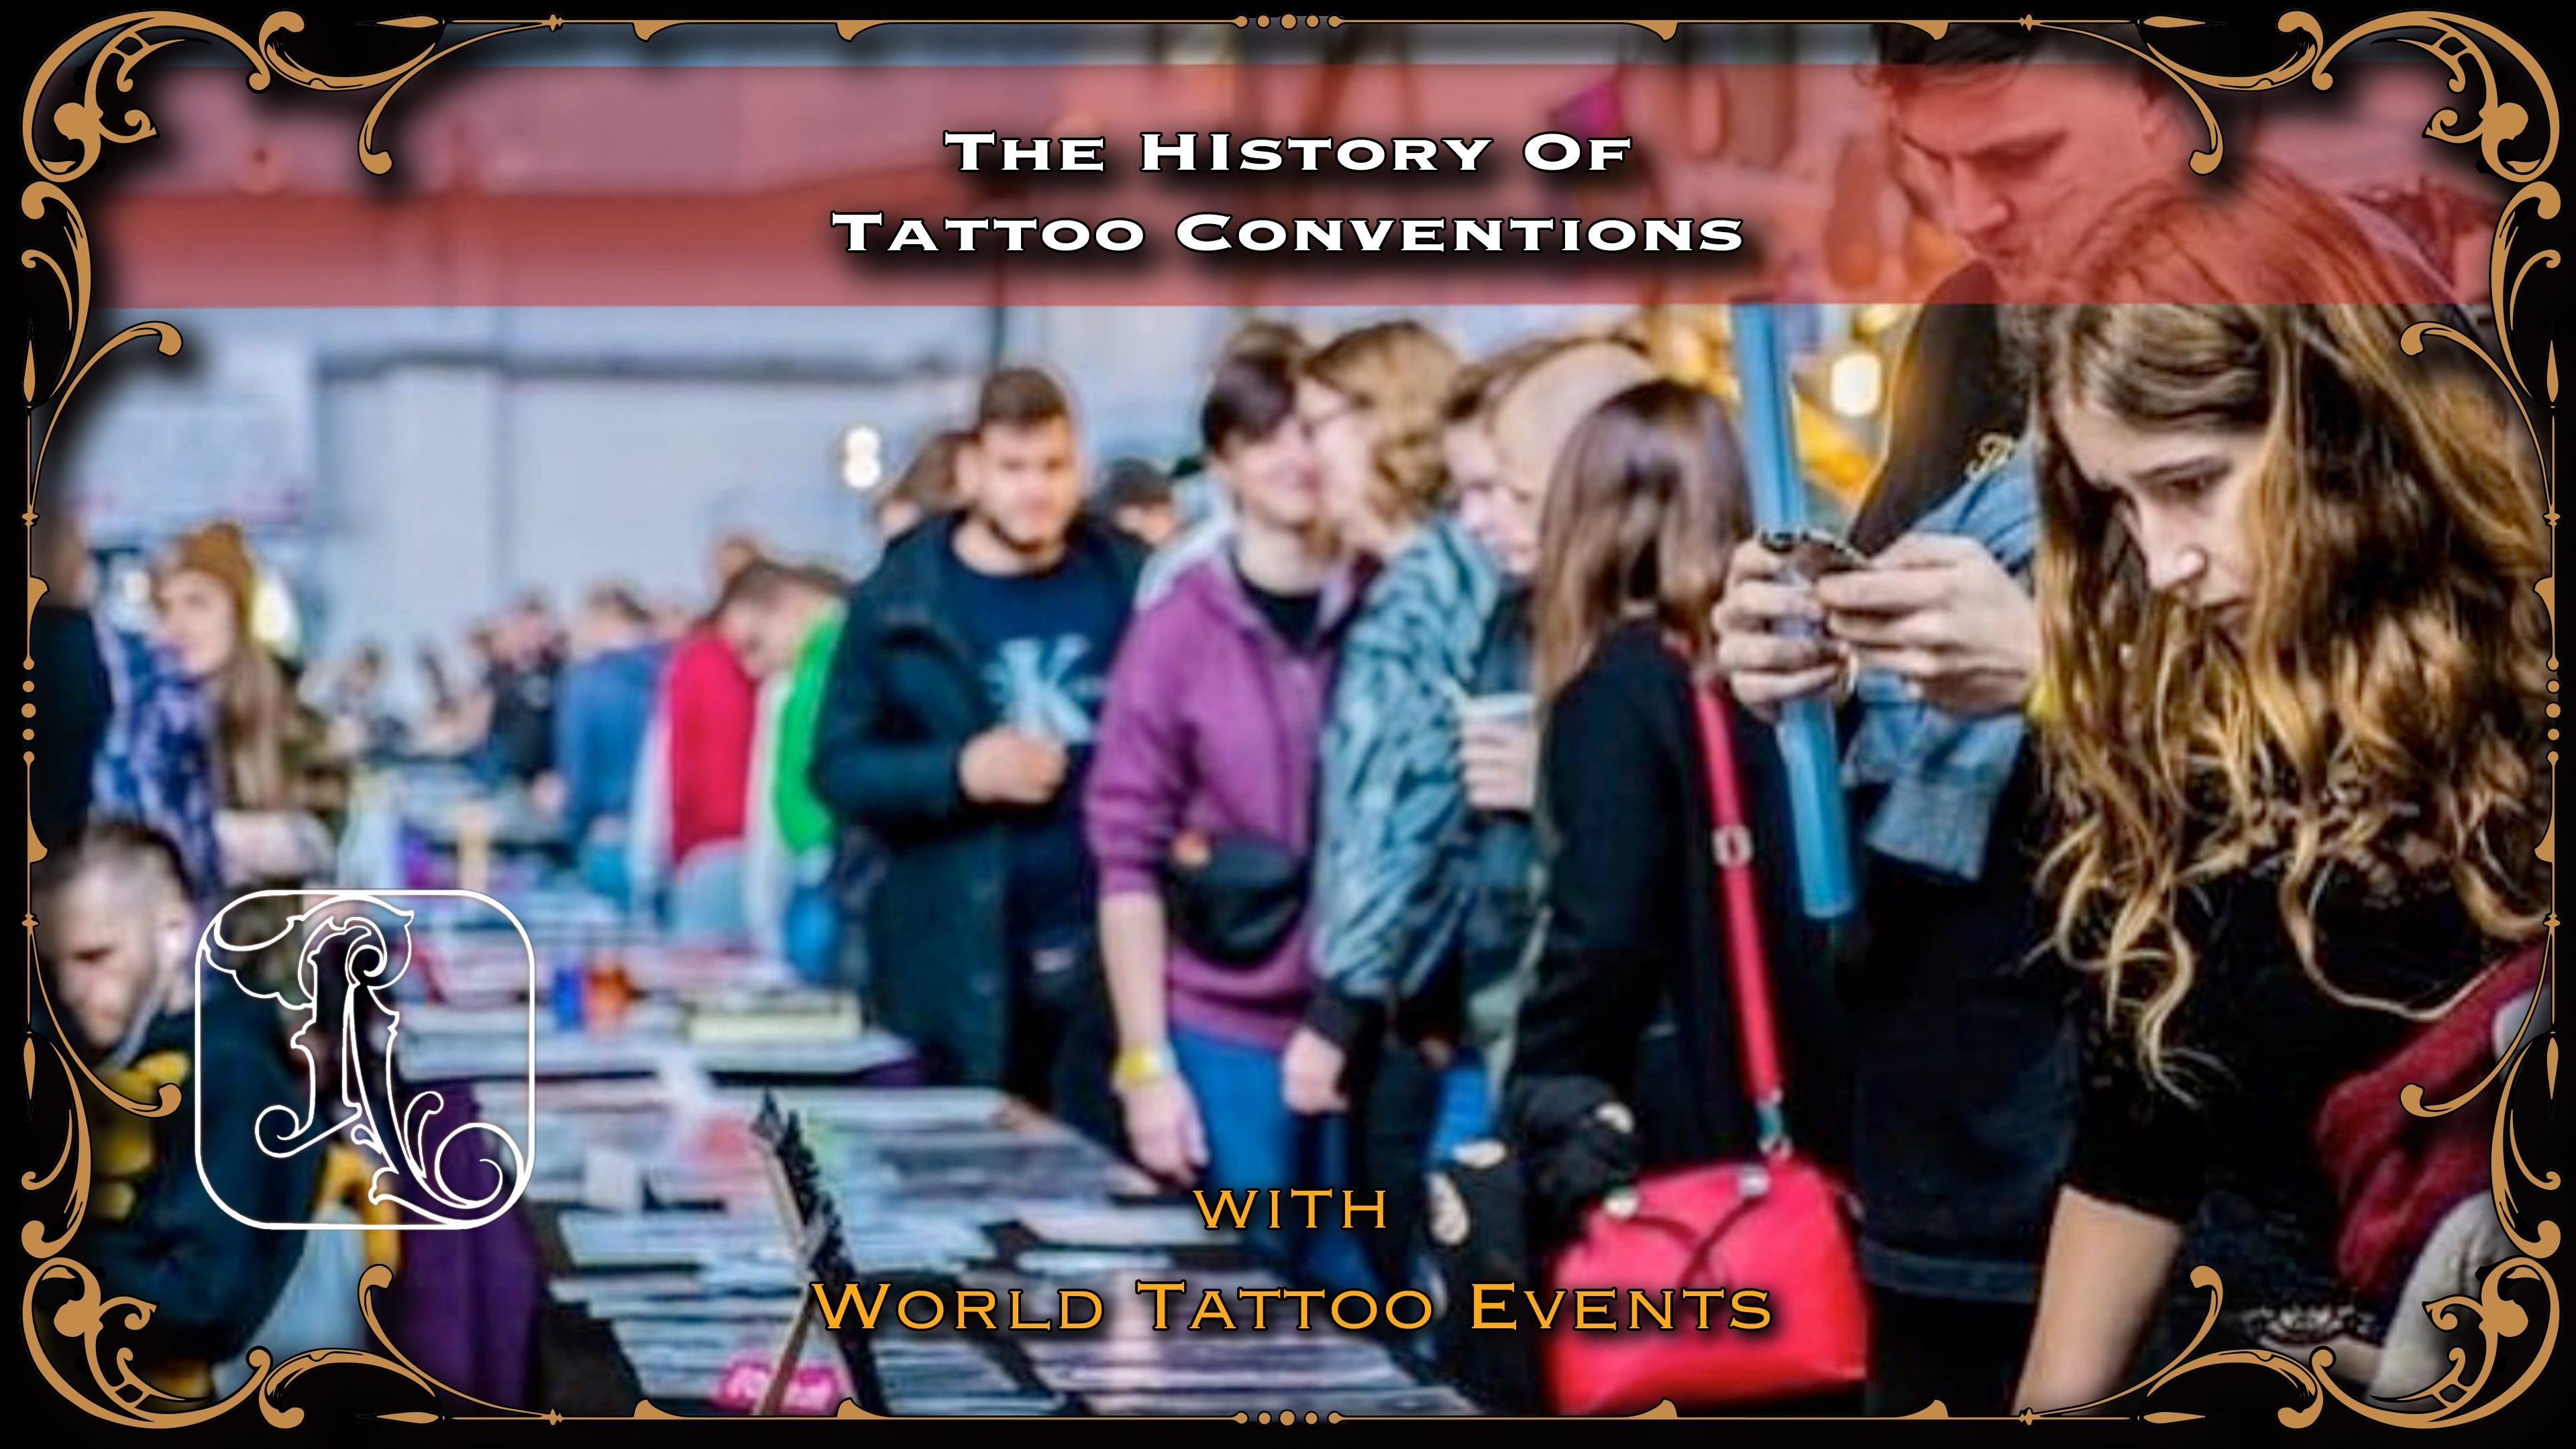 World Tattoo Events - Best of Show piece at @tattooshowargentina 2020, done  by Yeyo Tattoos !! Visit https://www.worldtattooevents.com/ the best tattoos,  artists and events all around the globe. | Facebook